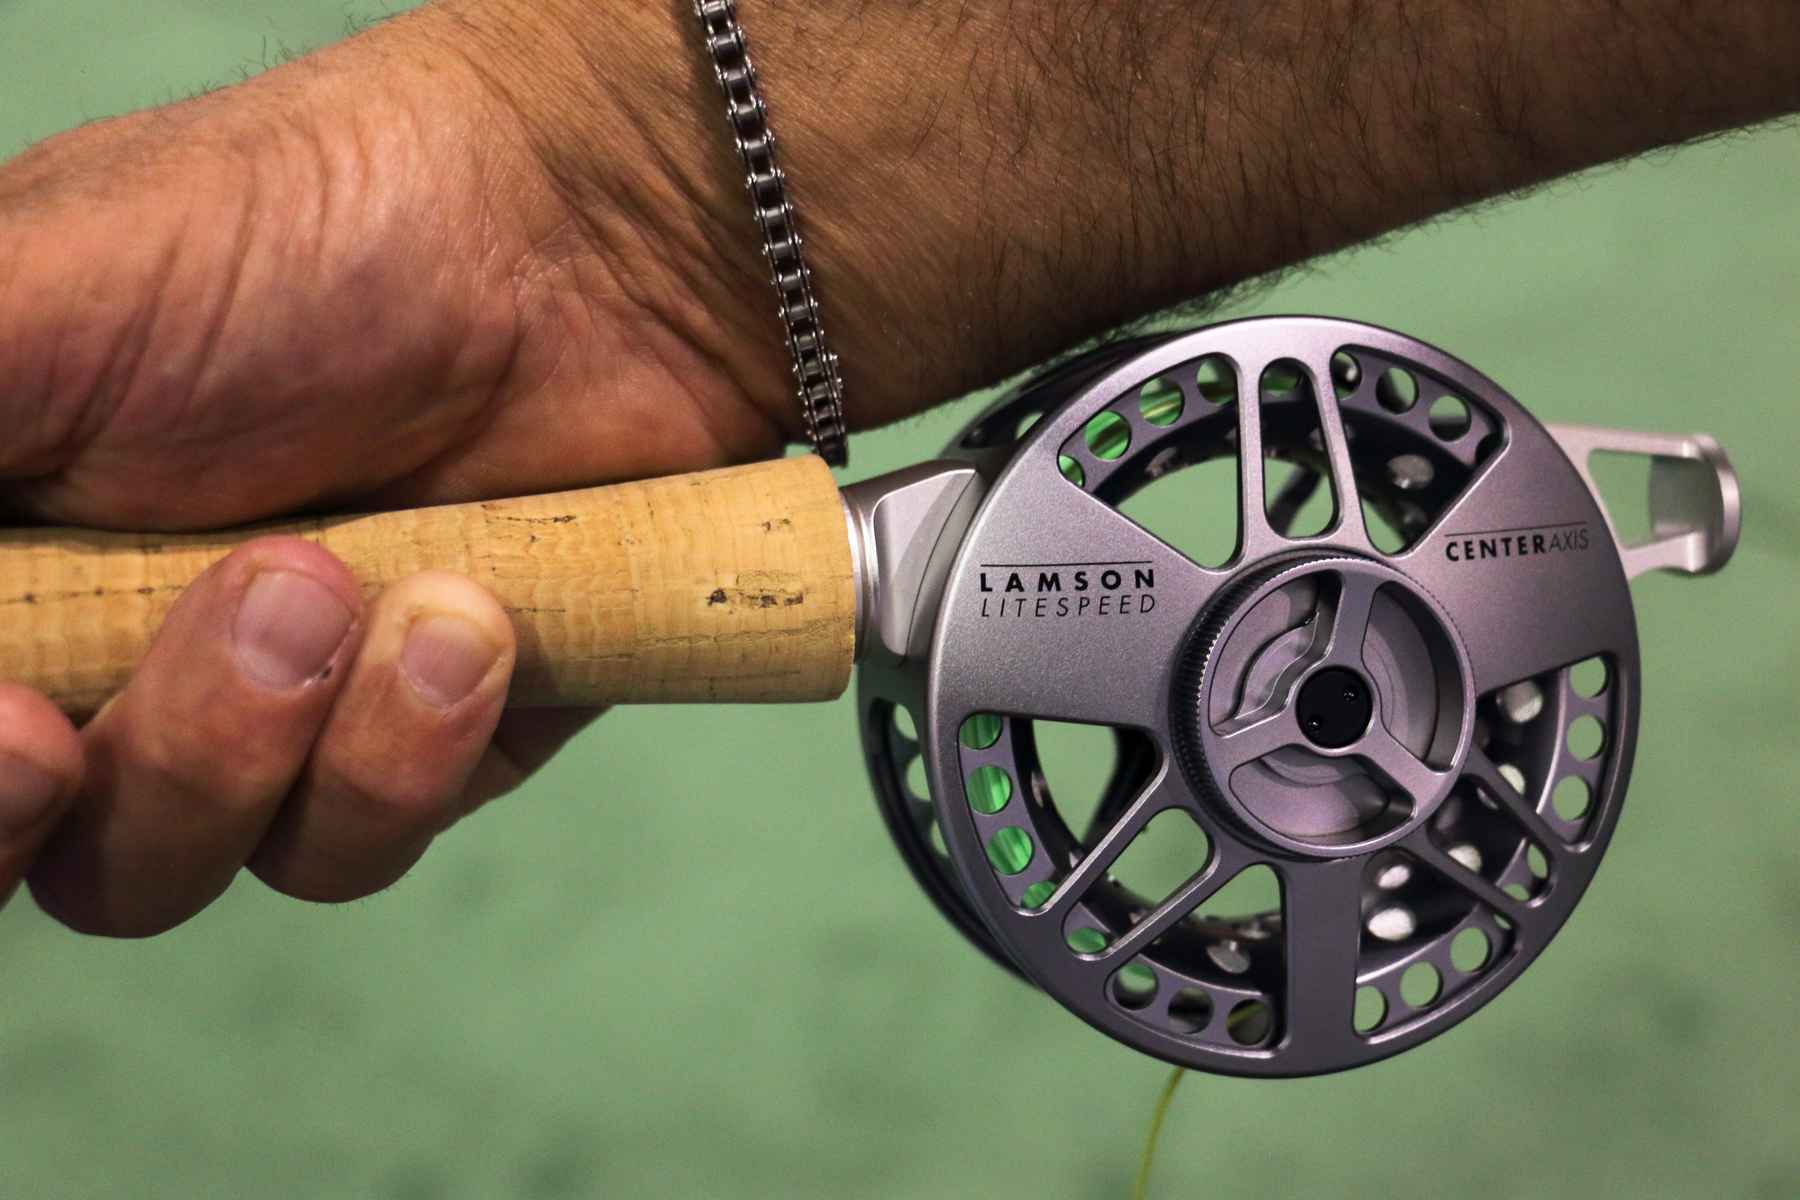 Combo deal: Lamson's new reel, with rod included